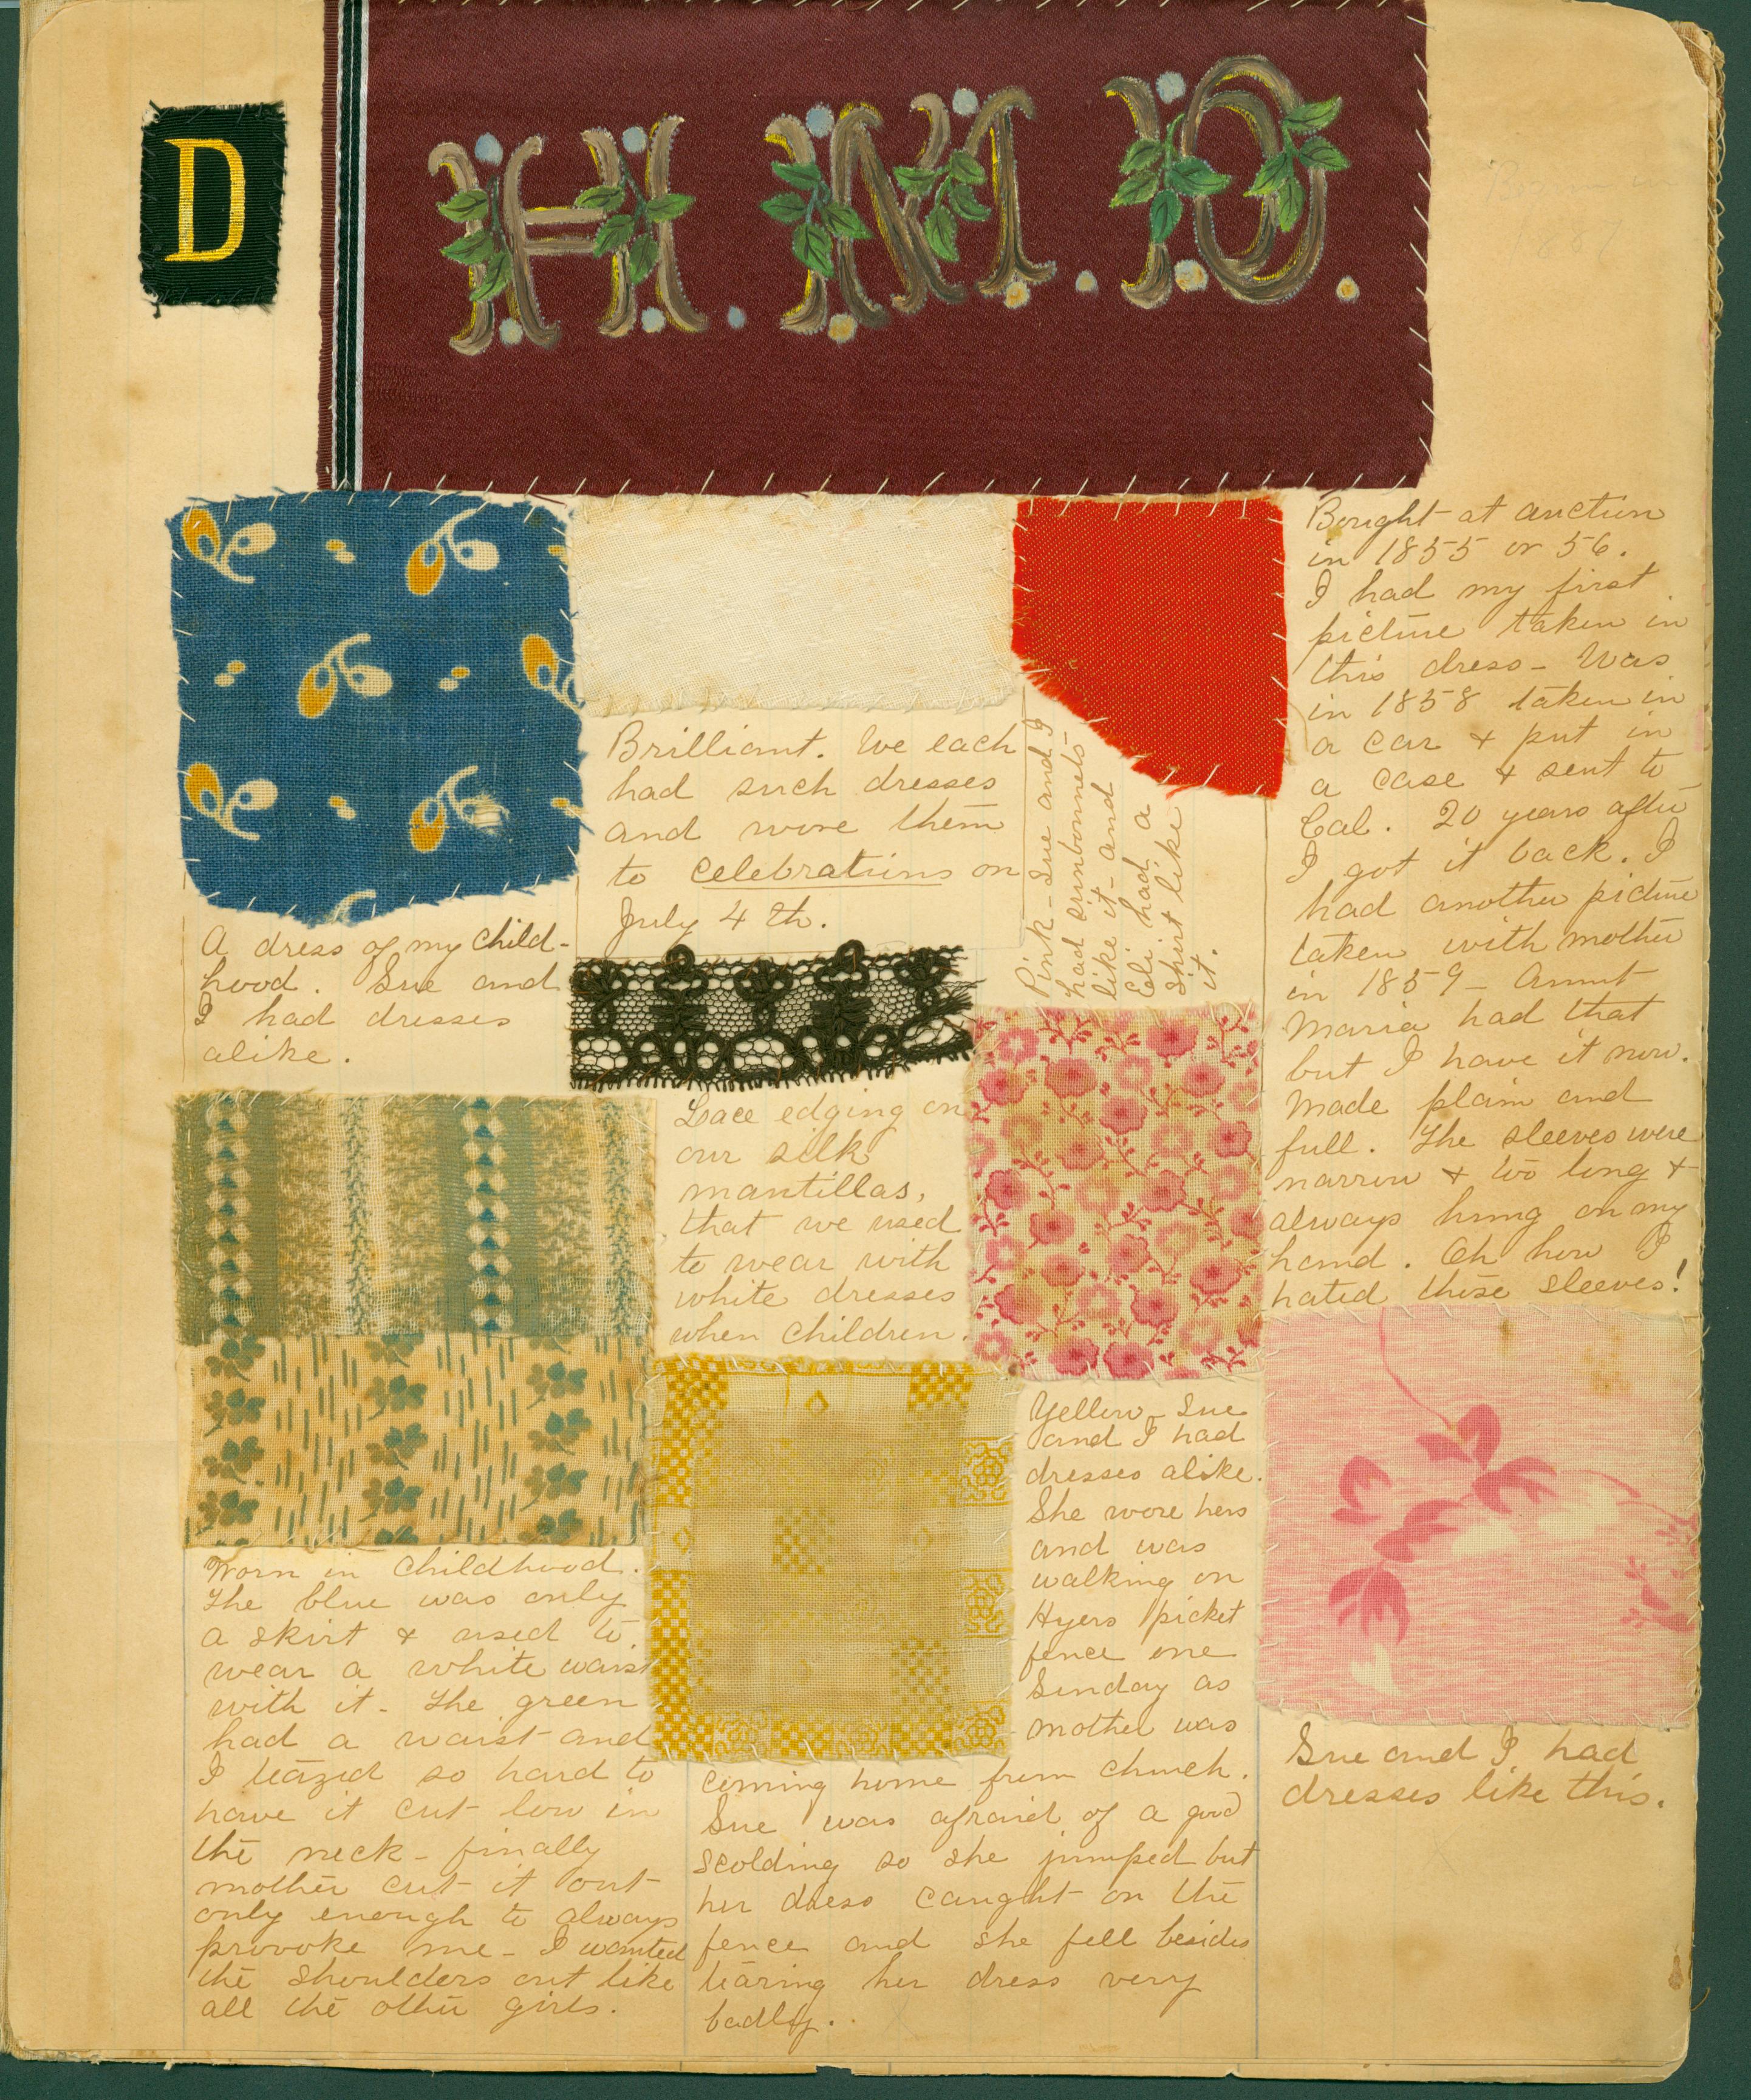 A page out of a scrapbook with pieces of printed fabric laid out.